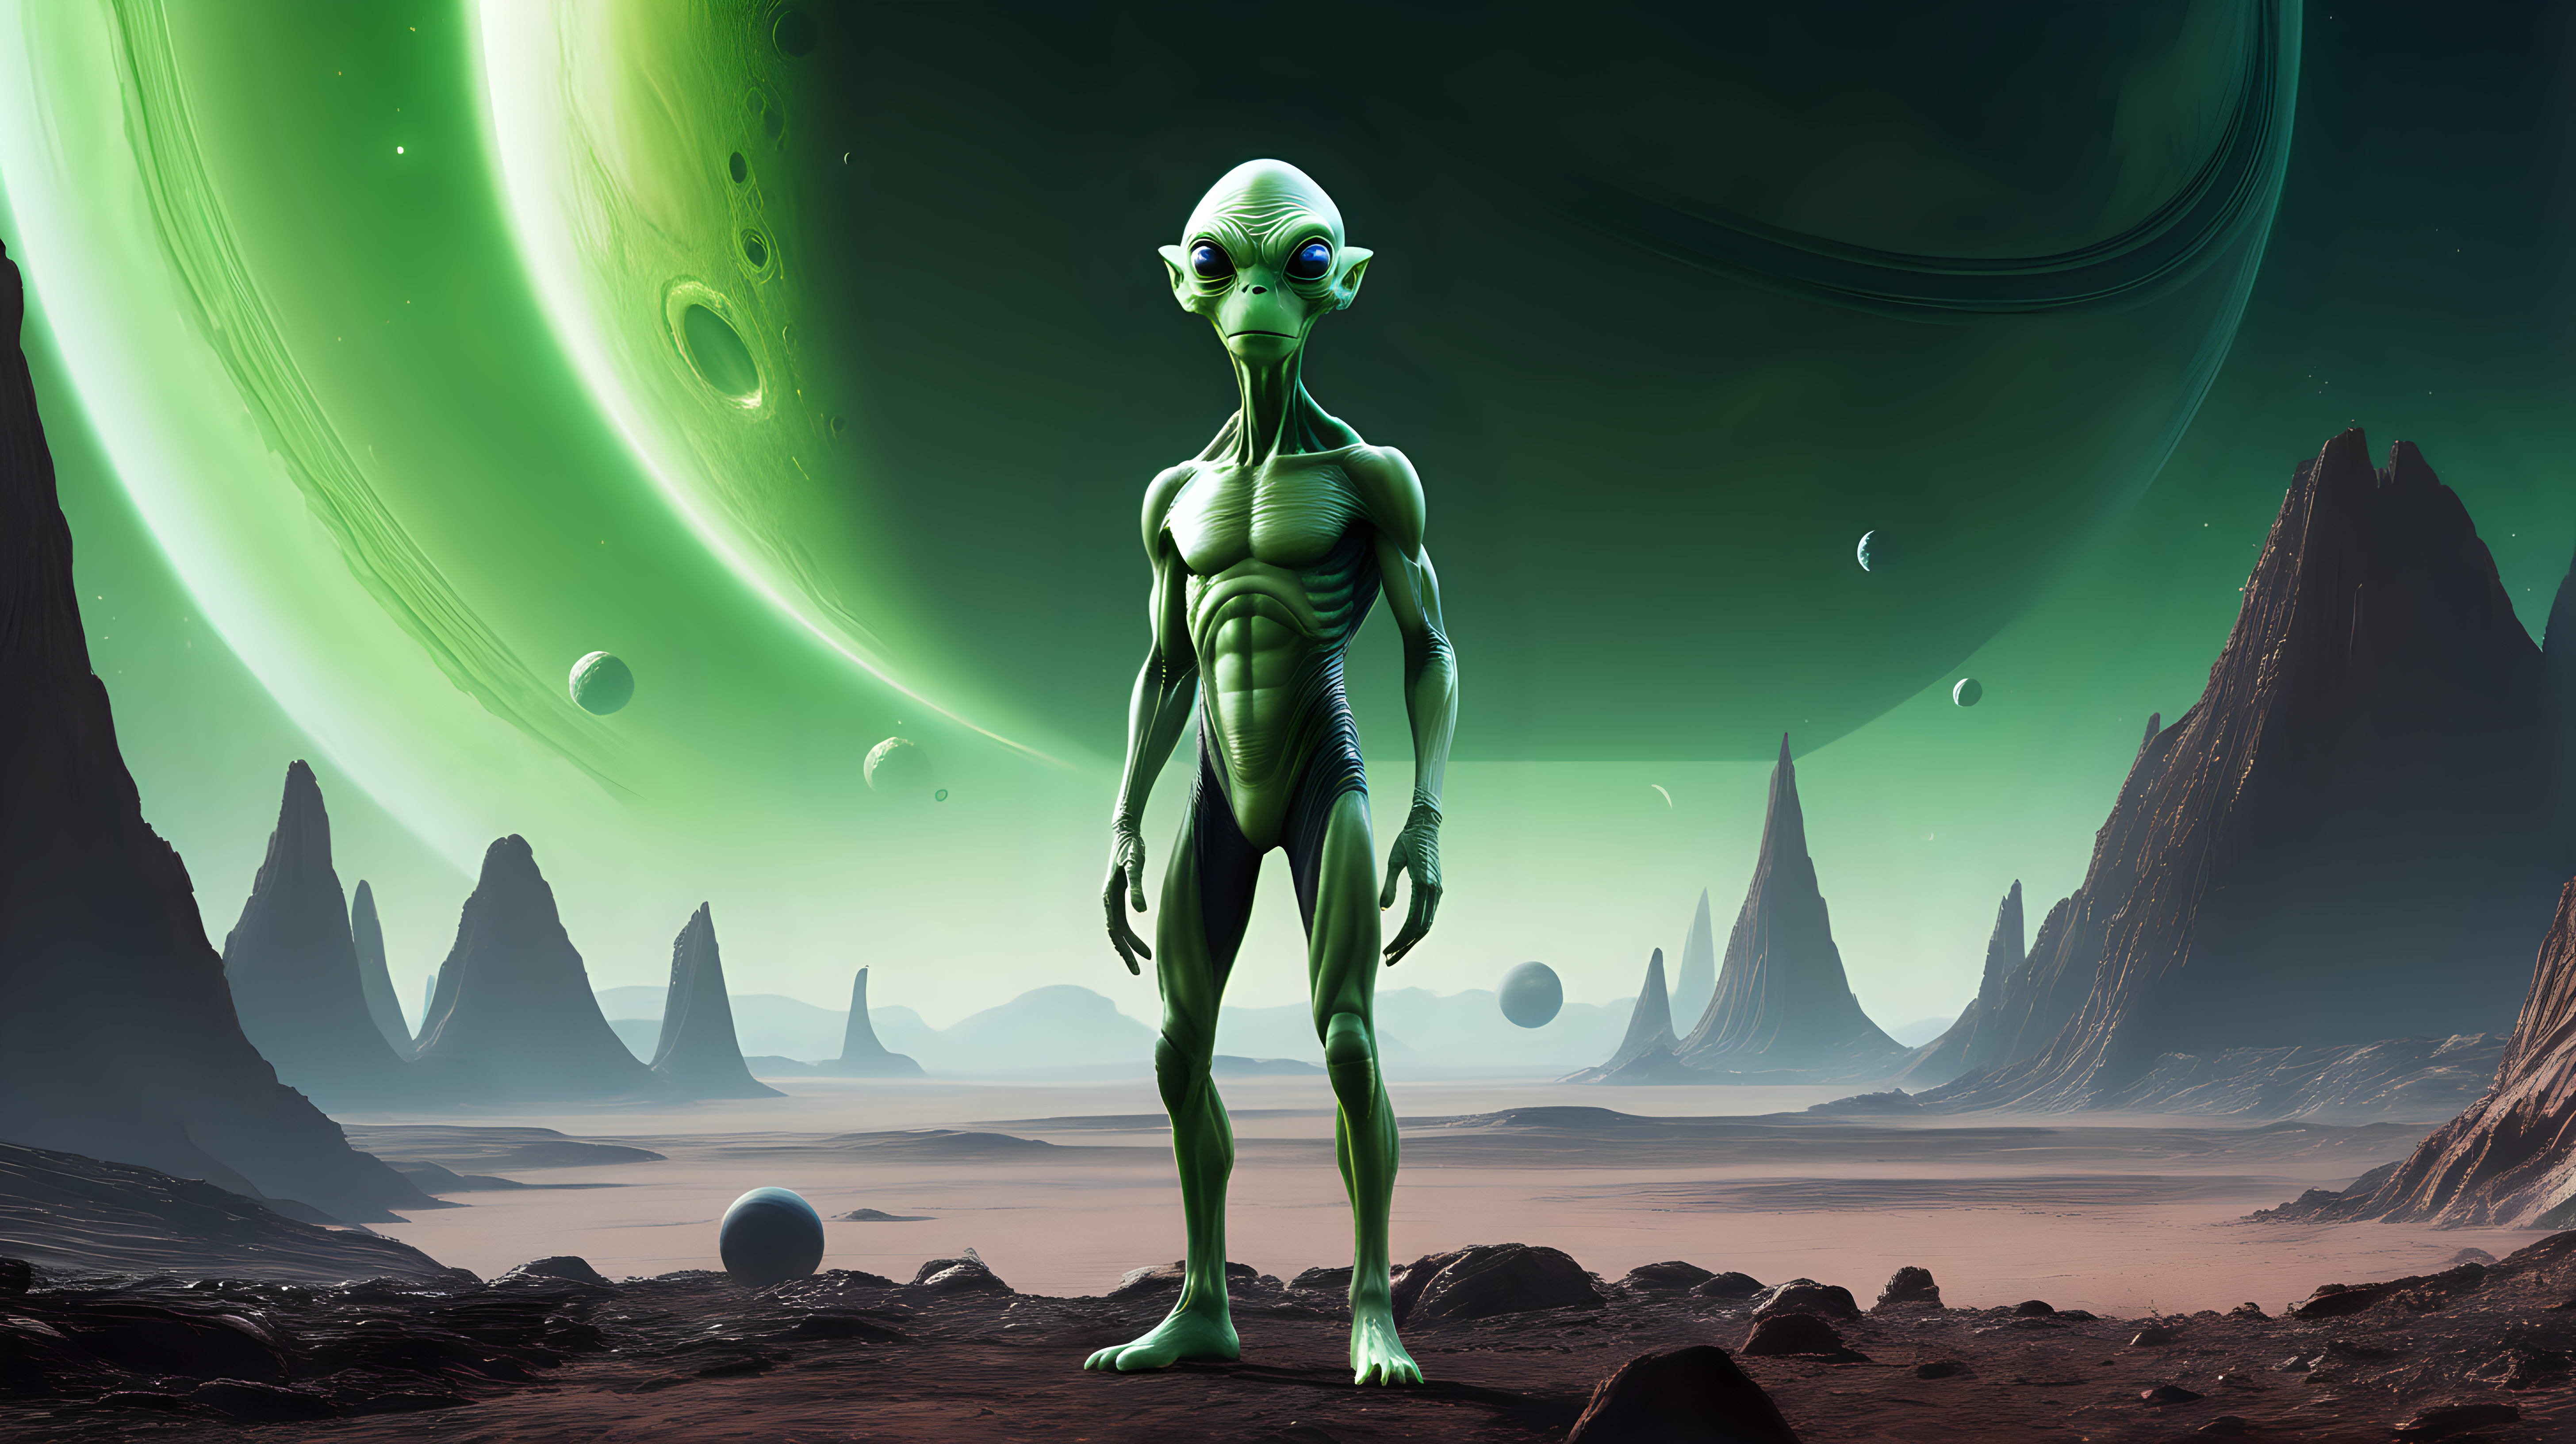 A green alien in the foreground on an